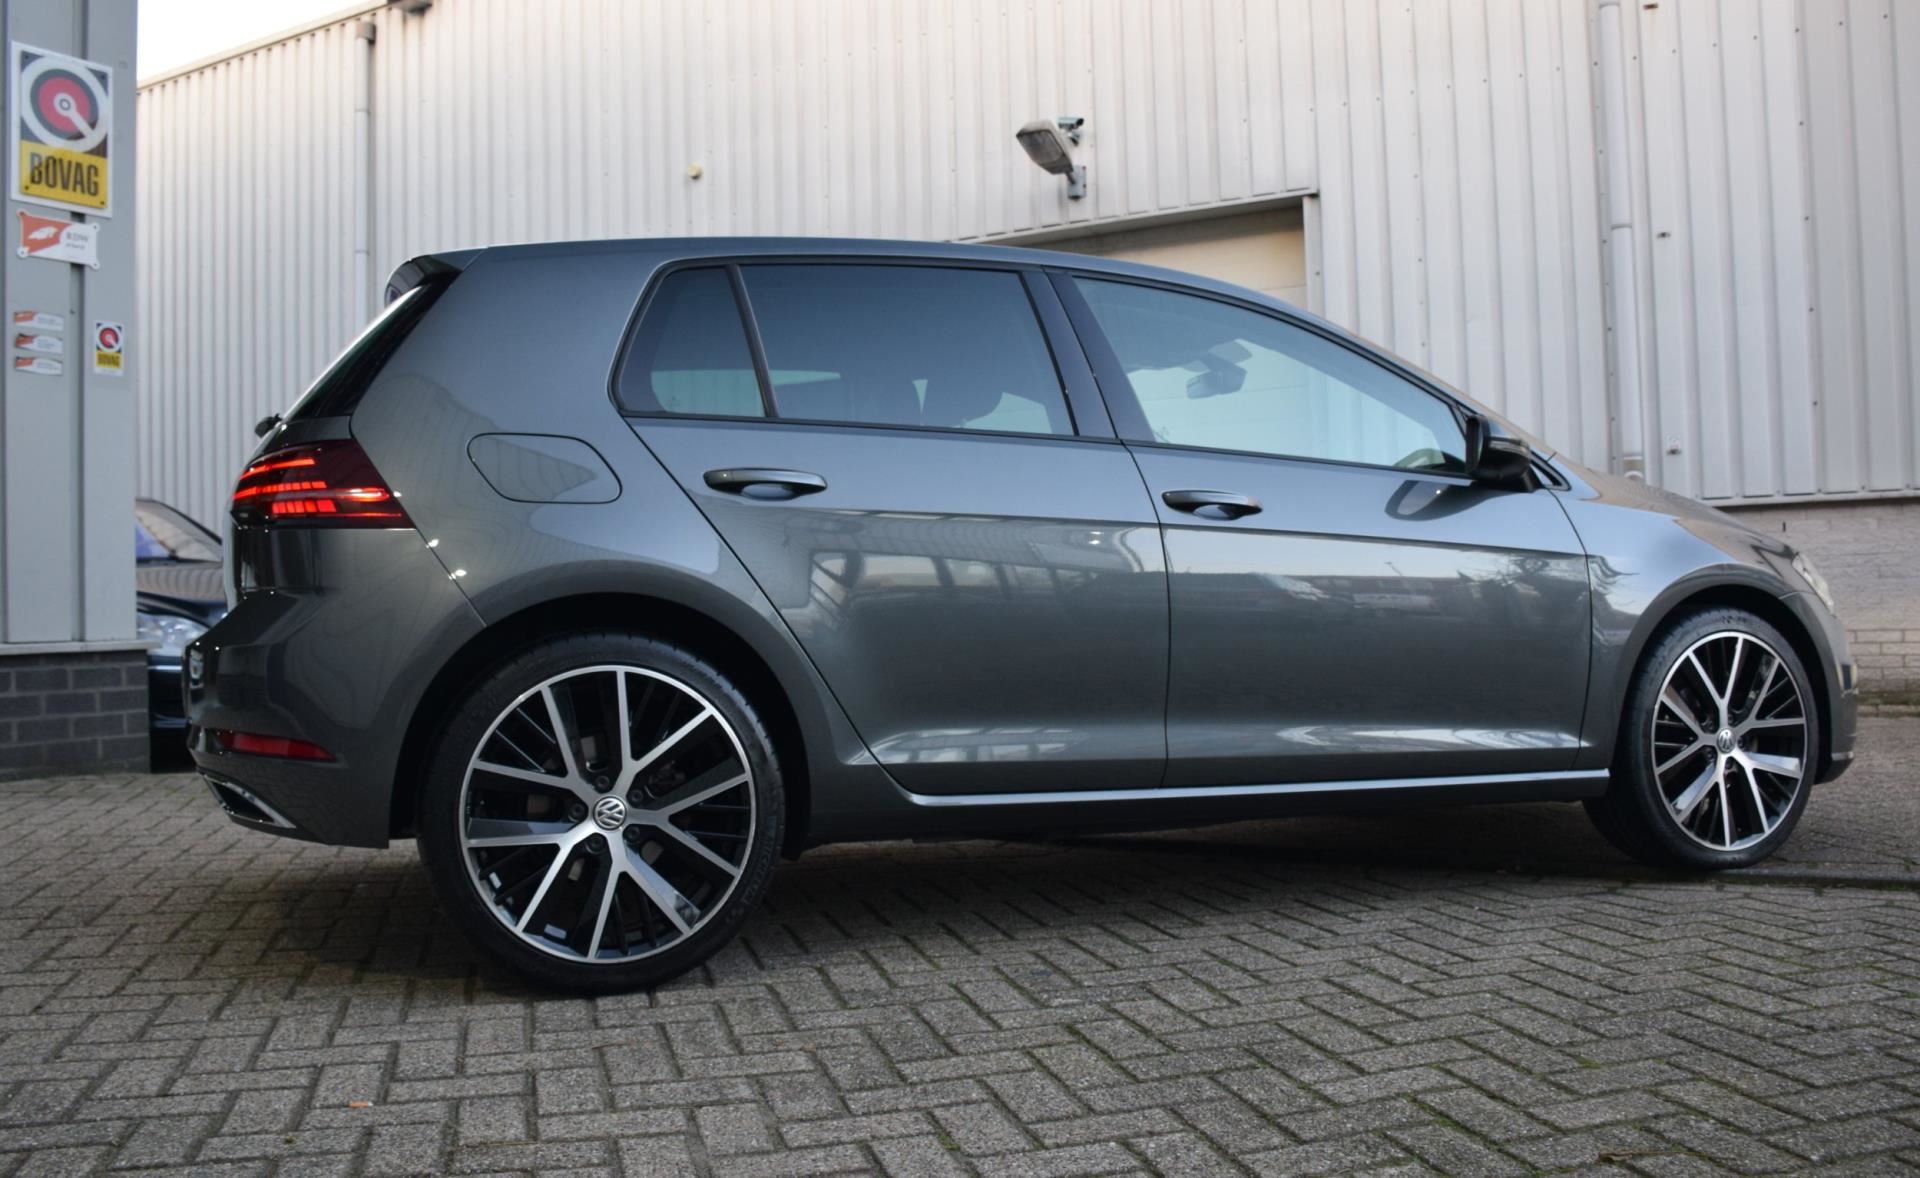 Volkswagen Golf occasion - Used Car Store Almere